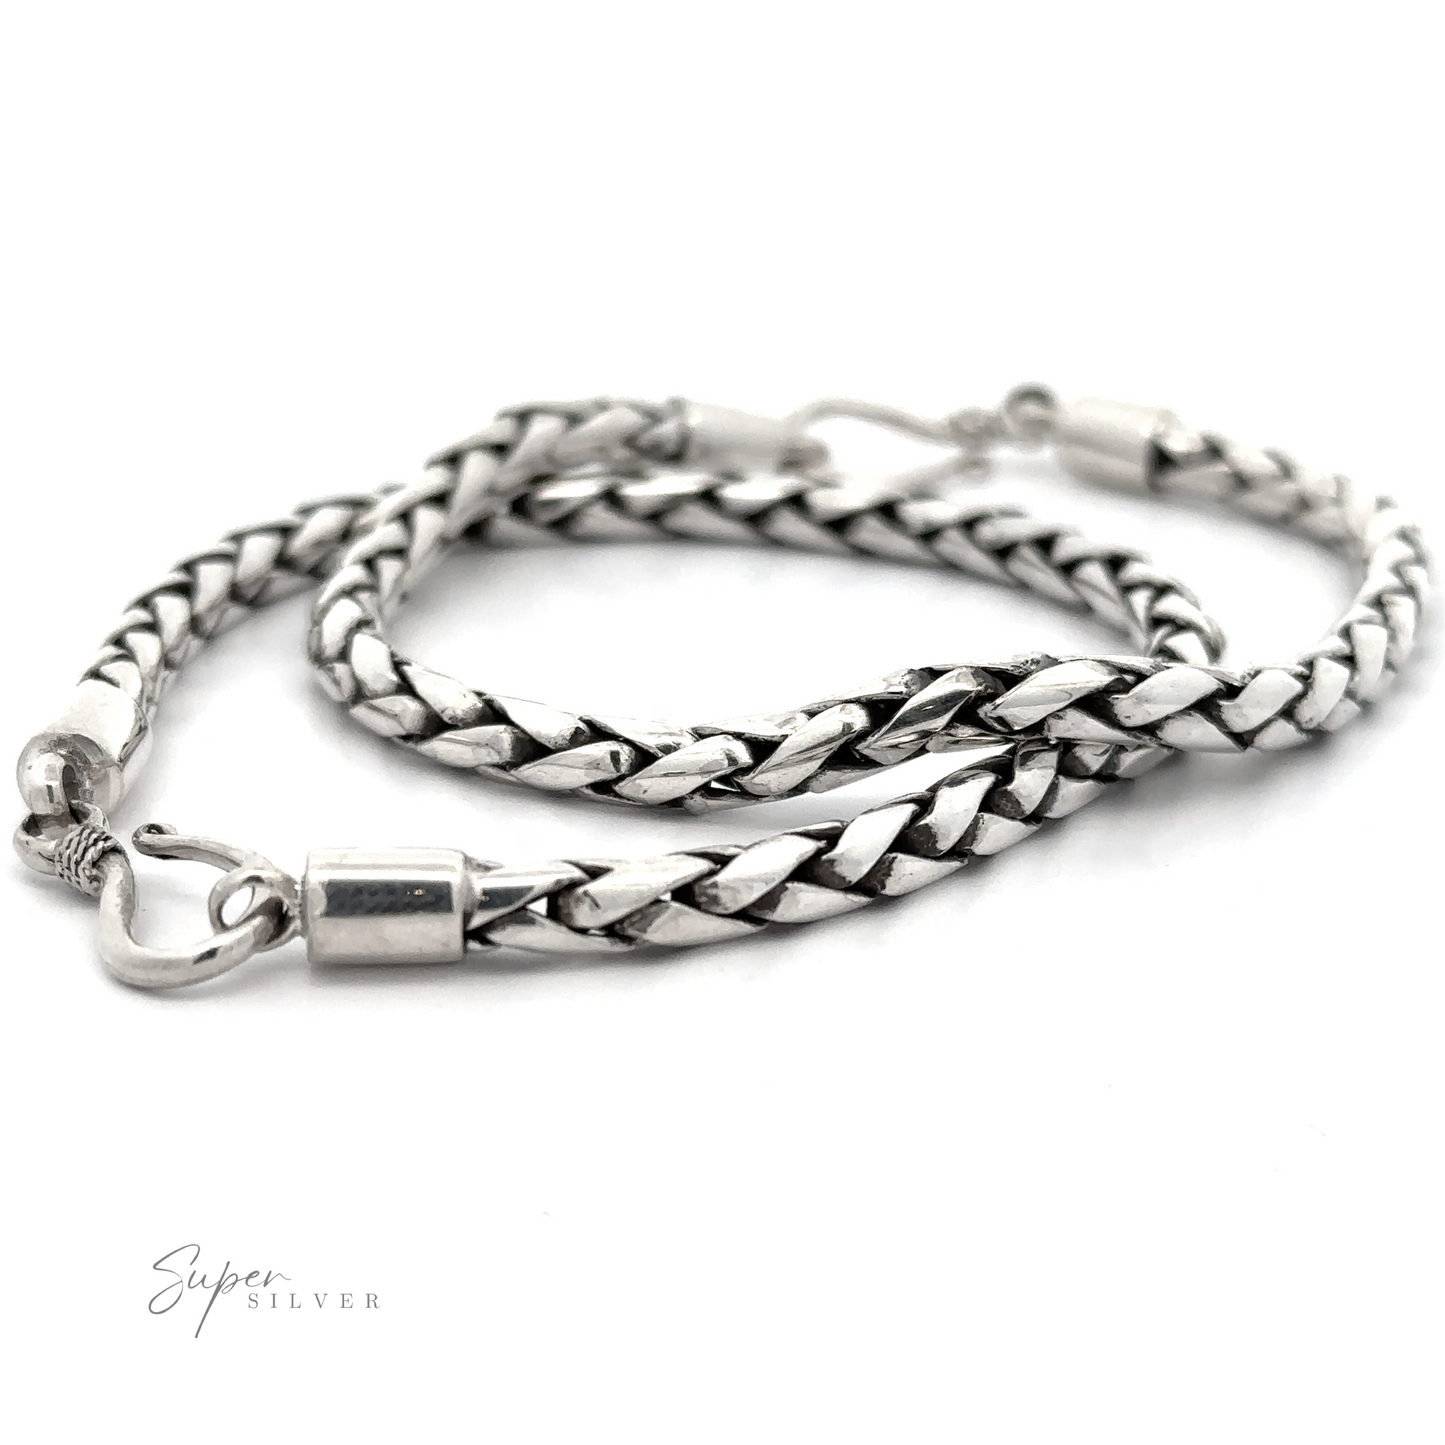 
                  
                    A 4mm Bright Rope Bracelet with a lobster clasp lies coiled on a white background, perfect for everyday and stacking. "Super Silver" is written in the bottom left corner, highlighting its .925 Sterling Silver quality.
                  
                